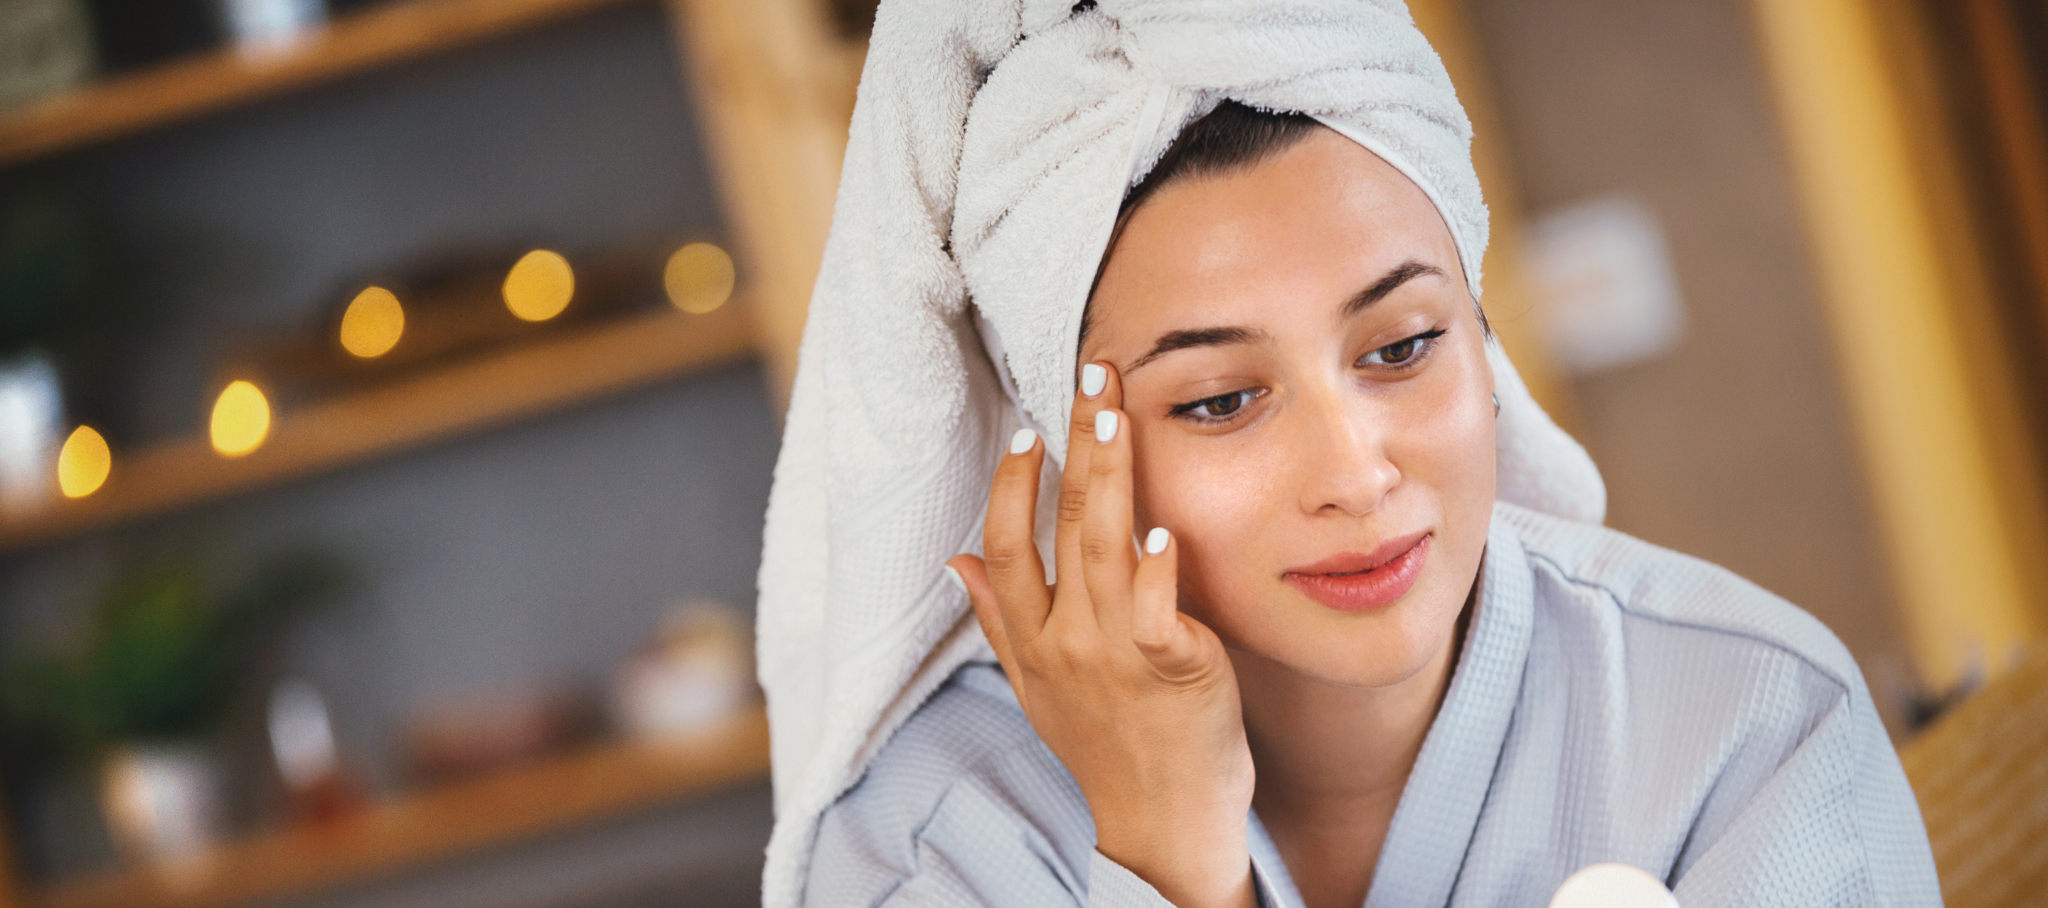 Avaya Aesthetics | Choosing the Right Skincare Routine for your Skin Type